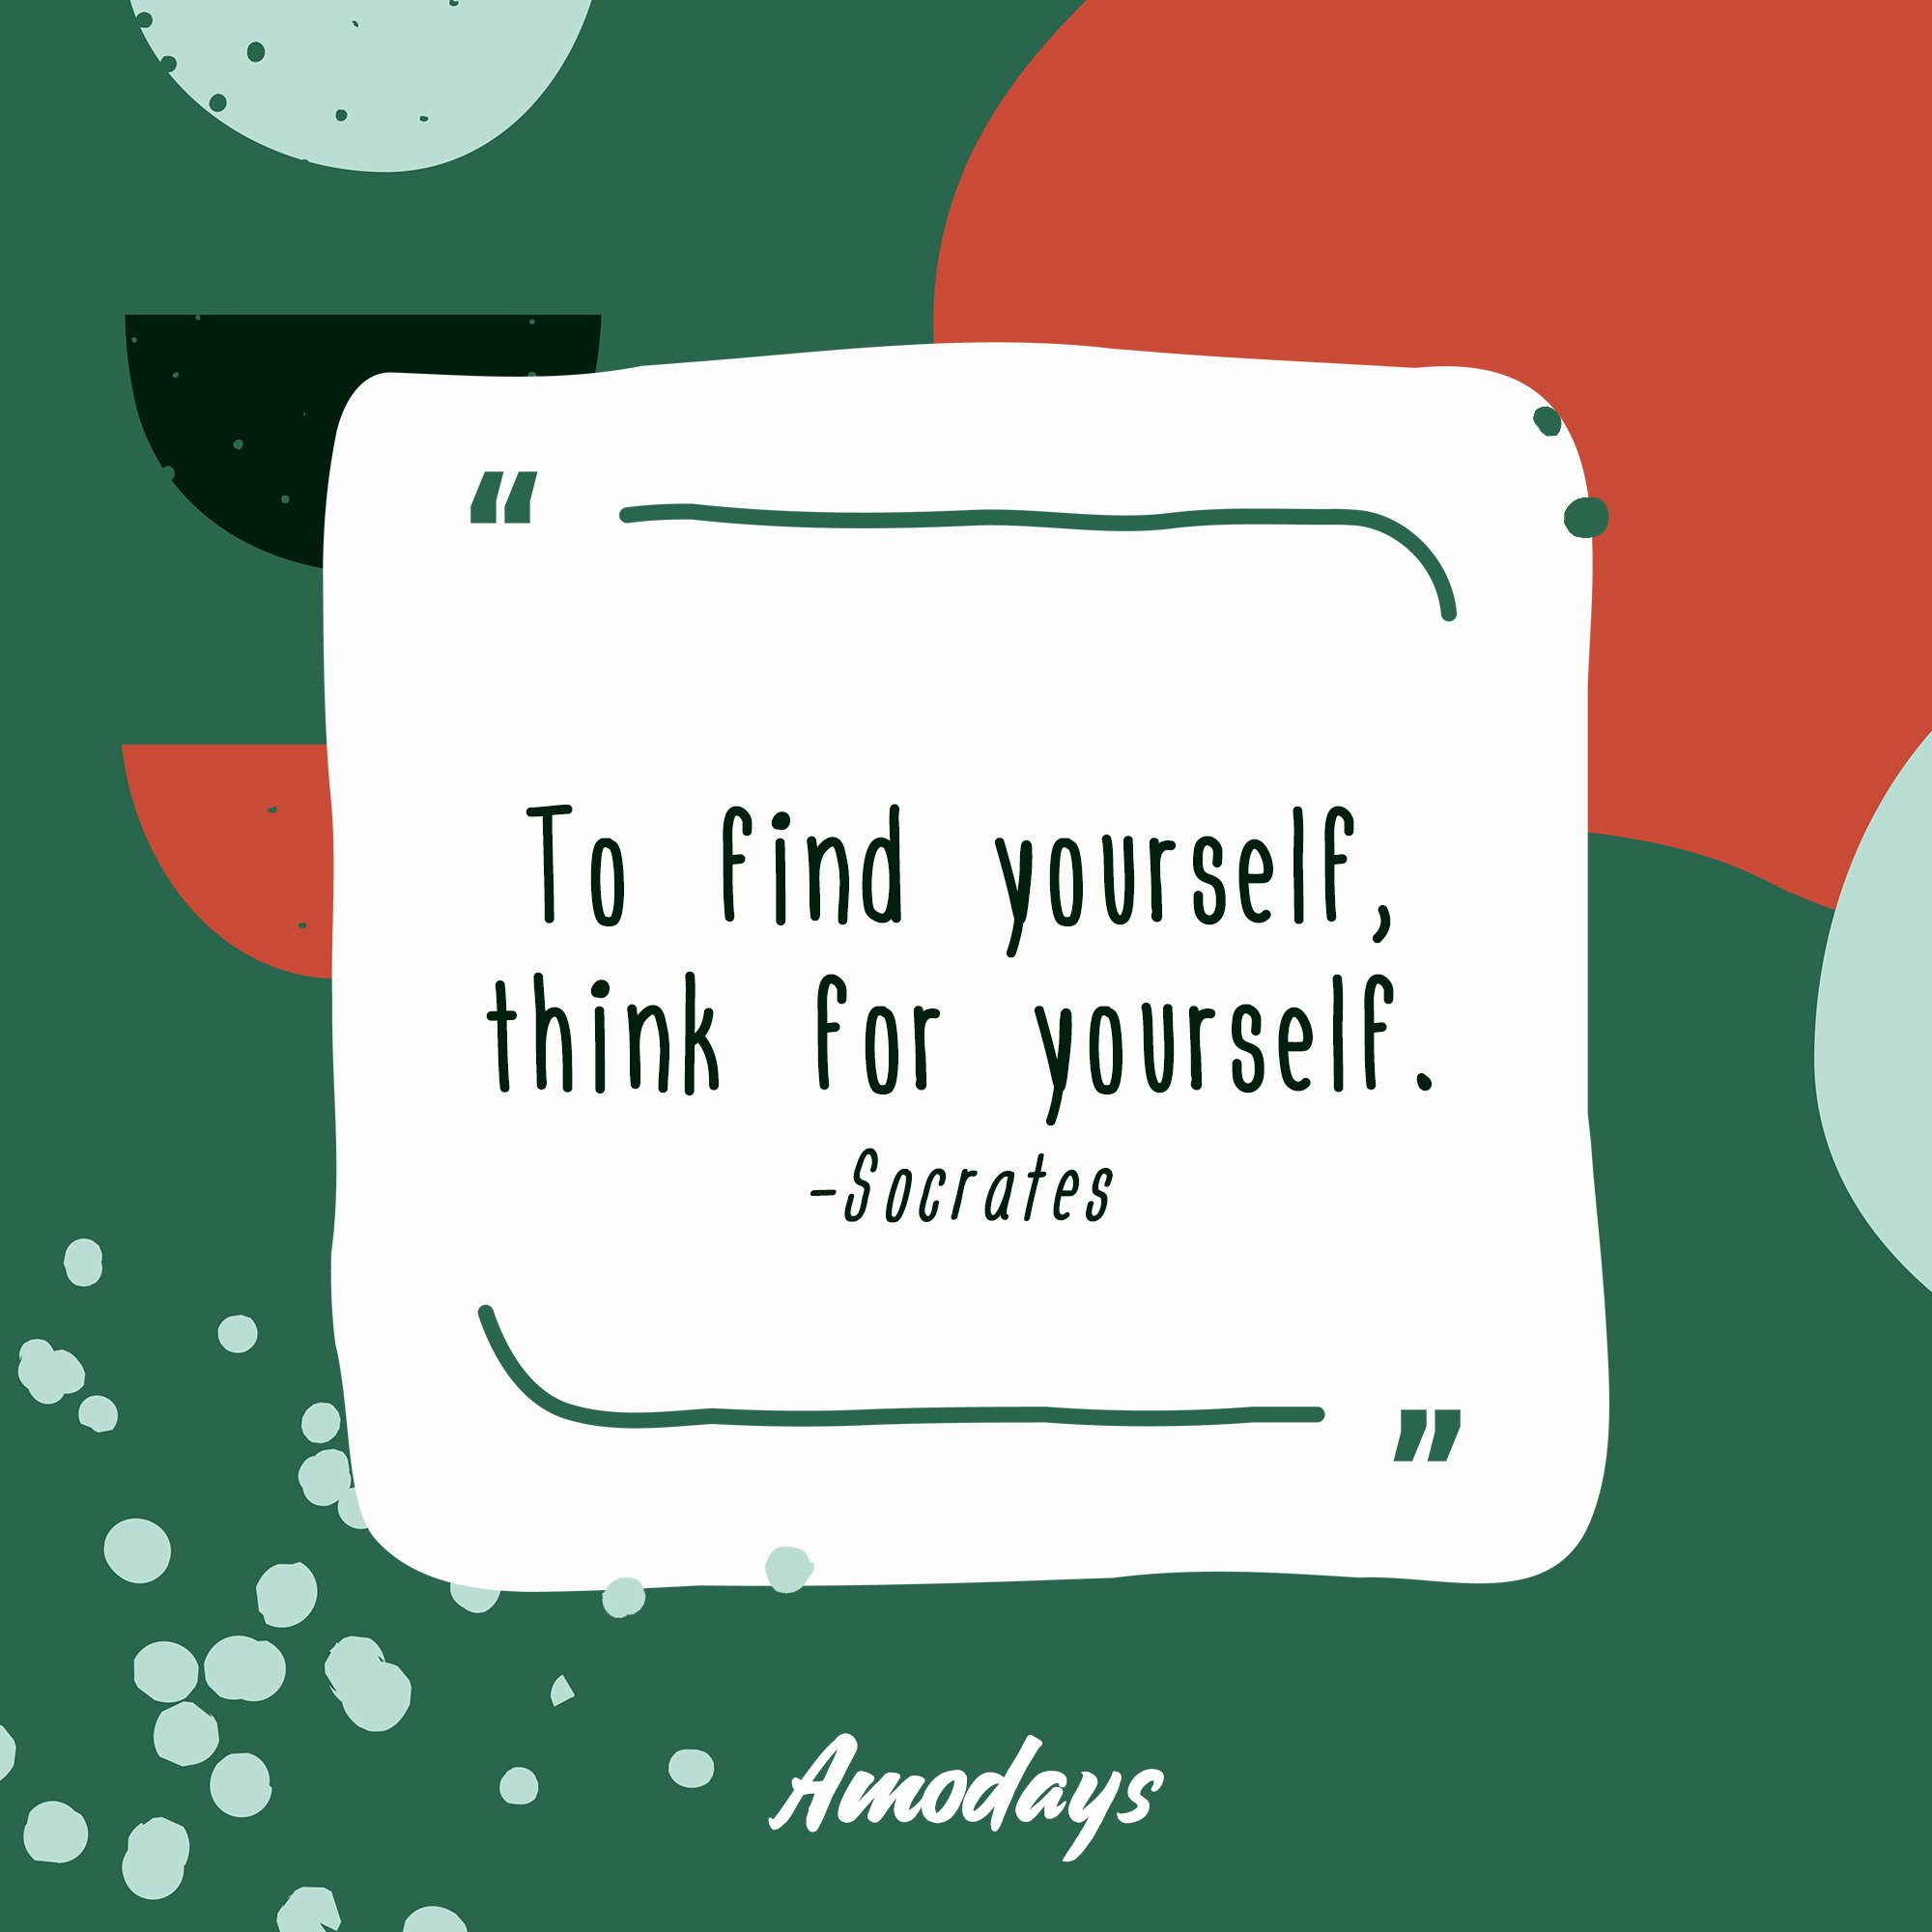 Socrates's quote: "To find yourself; think for yourself." | Image: AmoDays